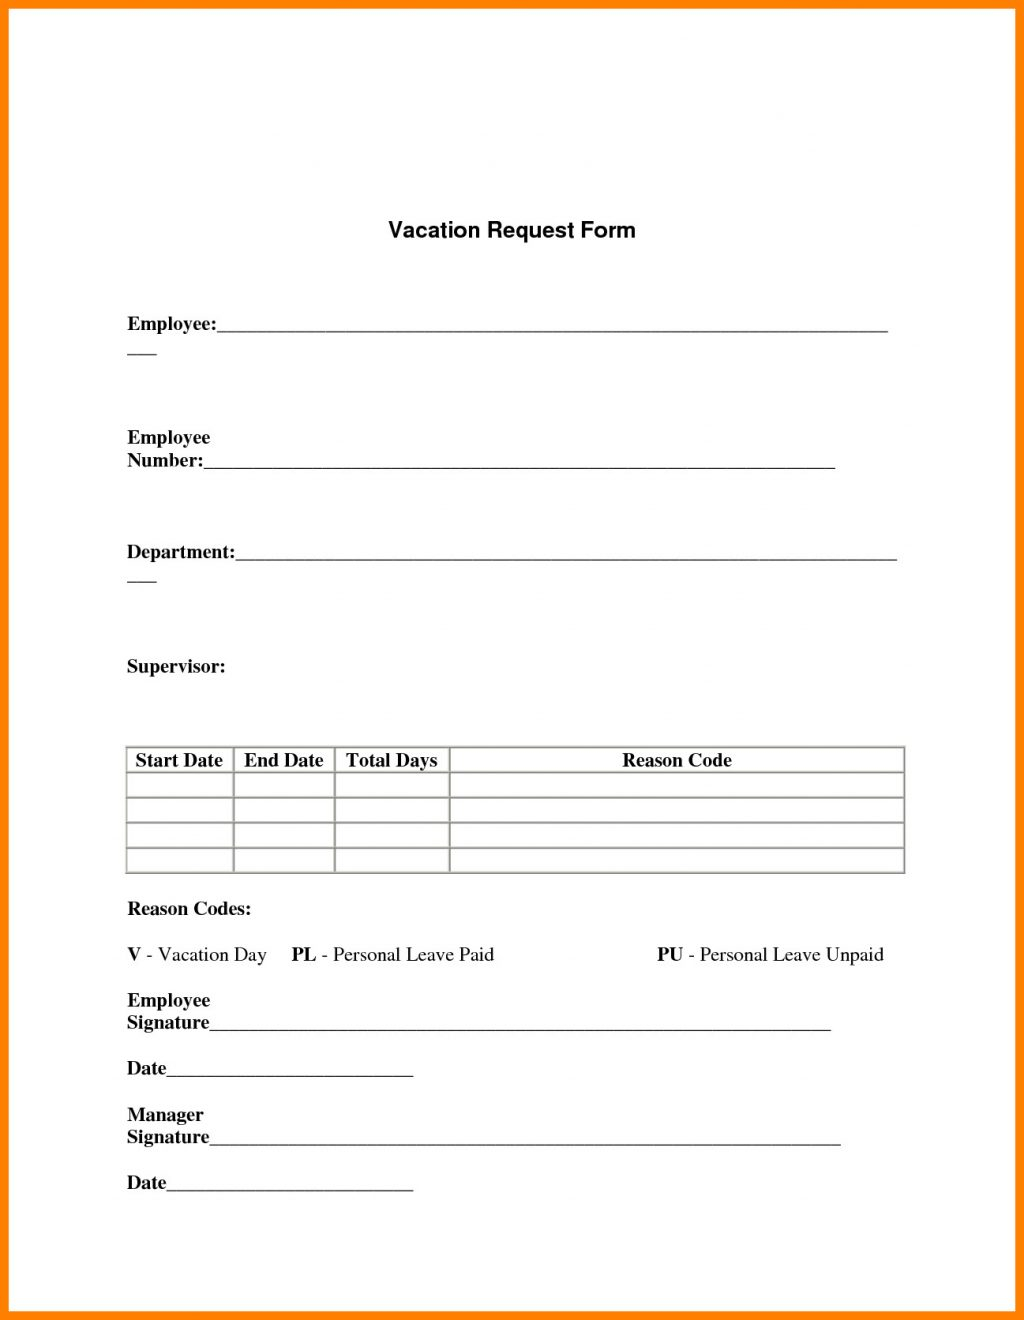 Request Form Template Bootstrap Sharepoint Quote Html With Travel Request Form Template Word